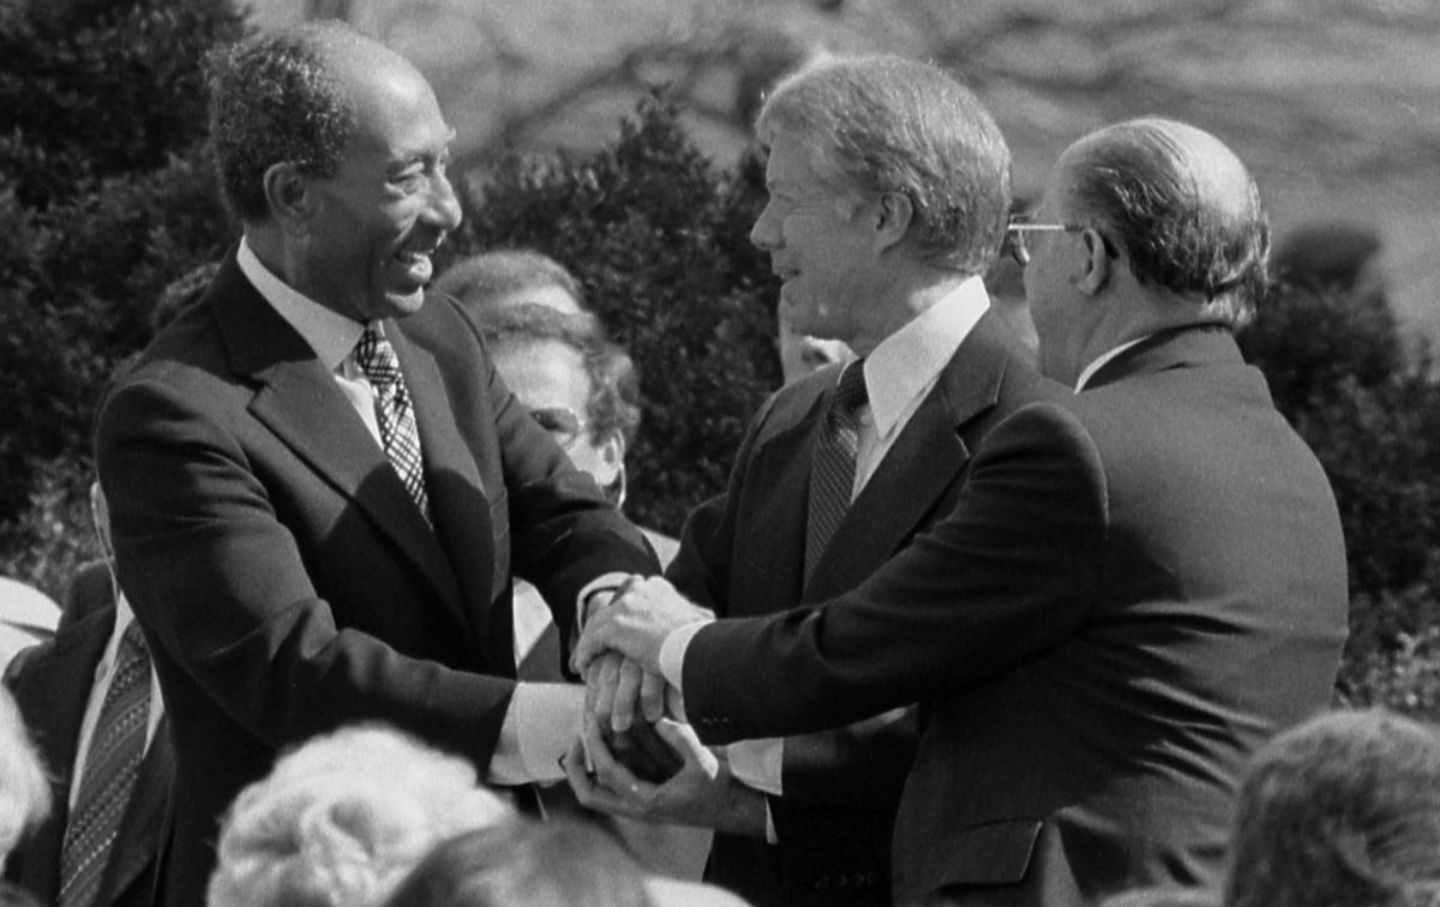 March 26, 1979: Israel and Egypt Sign Peace Treaty